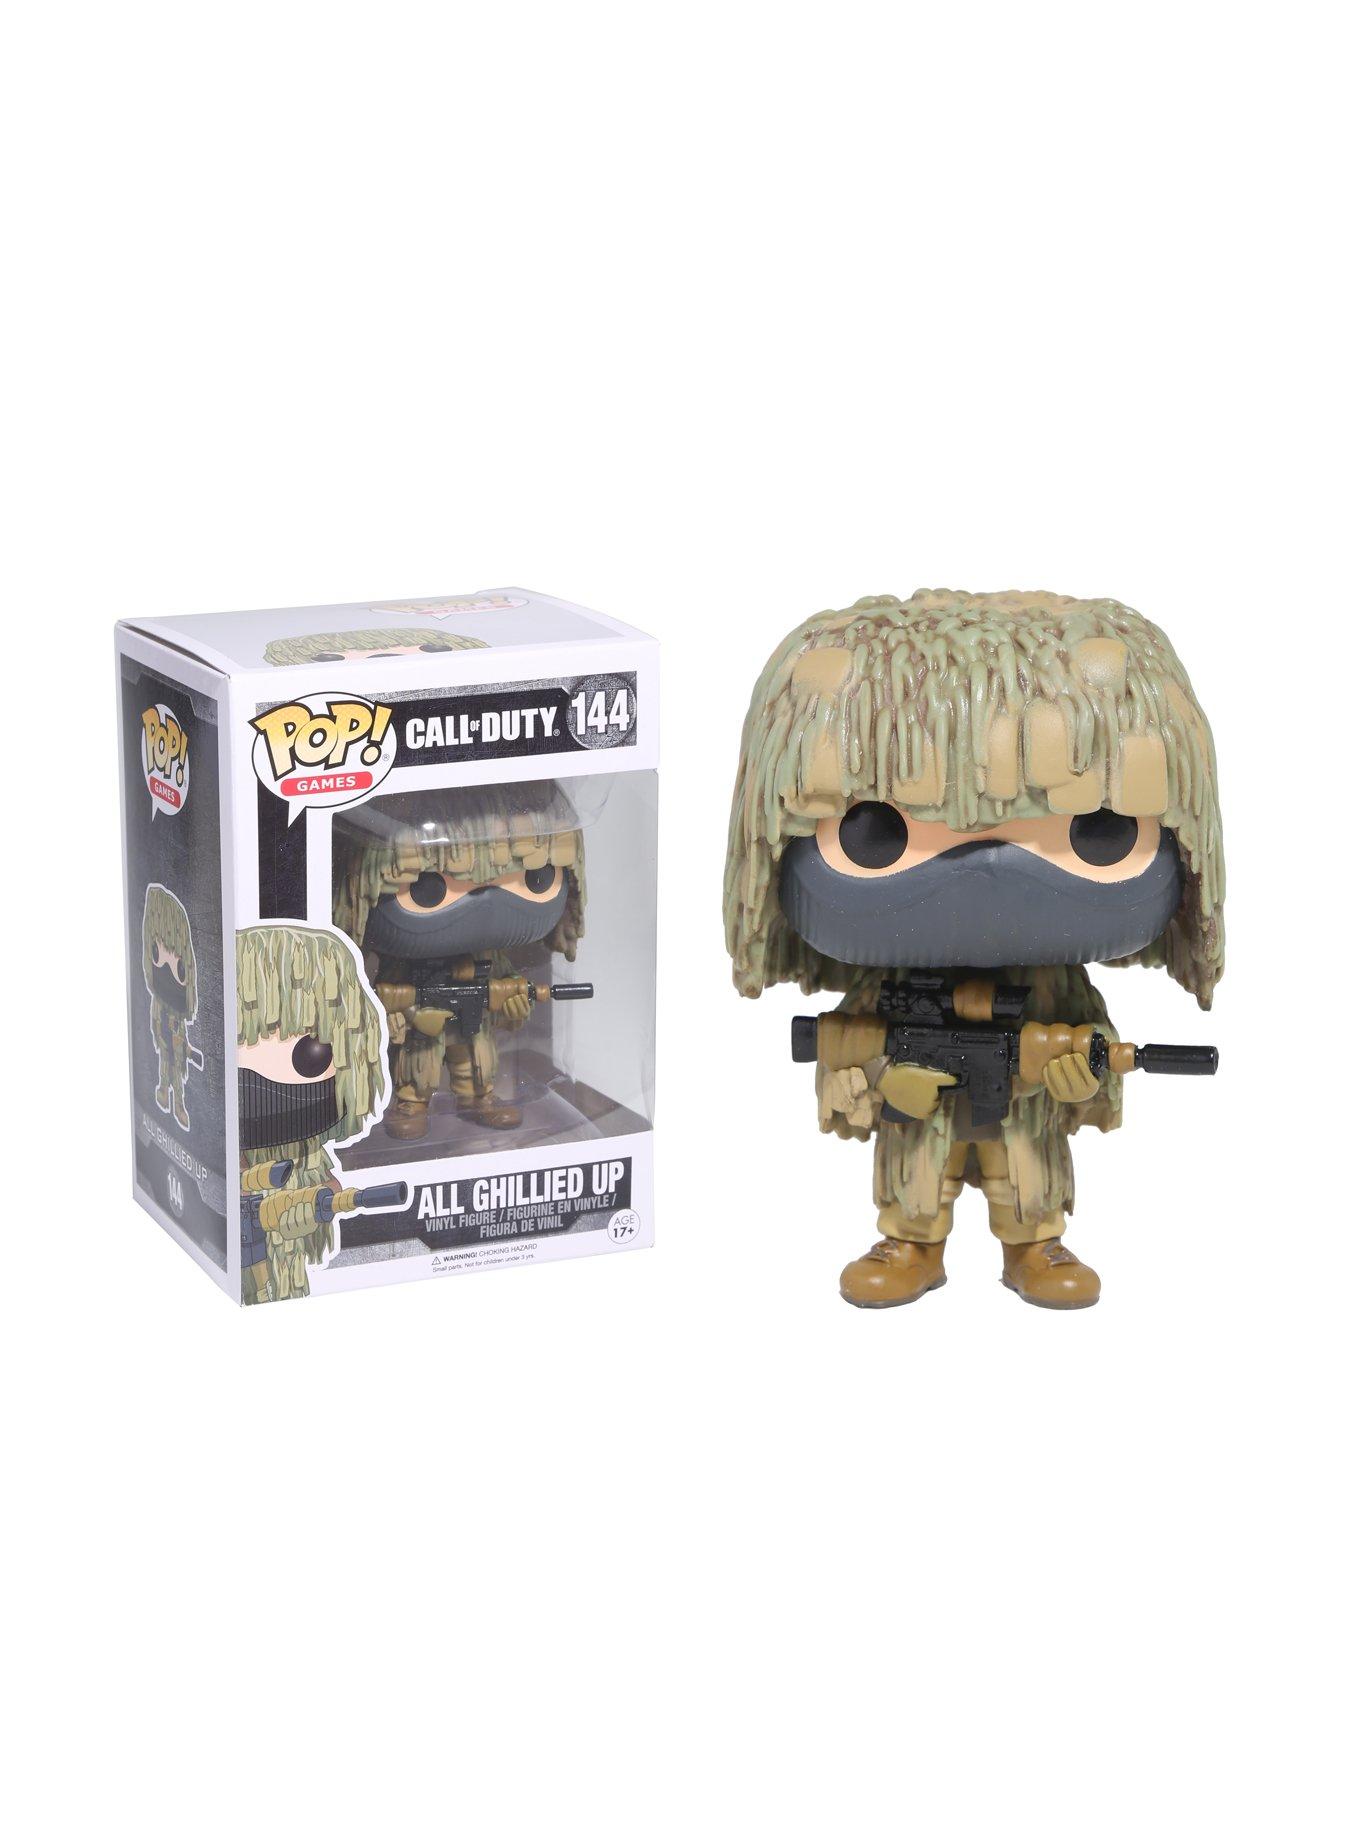 Funko POP! Games Call of Duty All Ghillied Up #144 Vinyl Figure